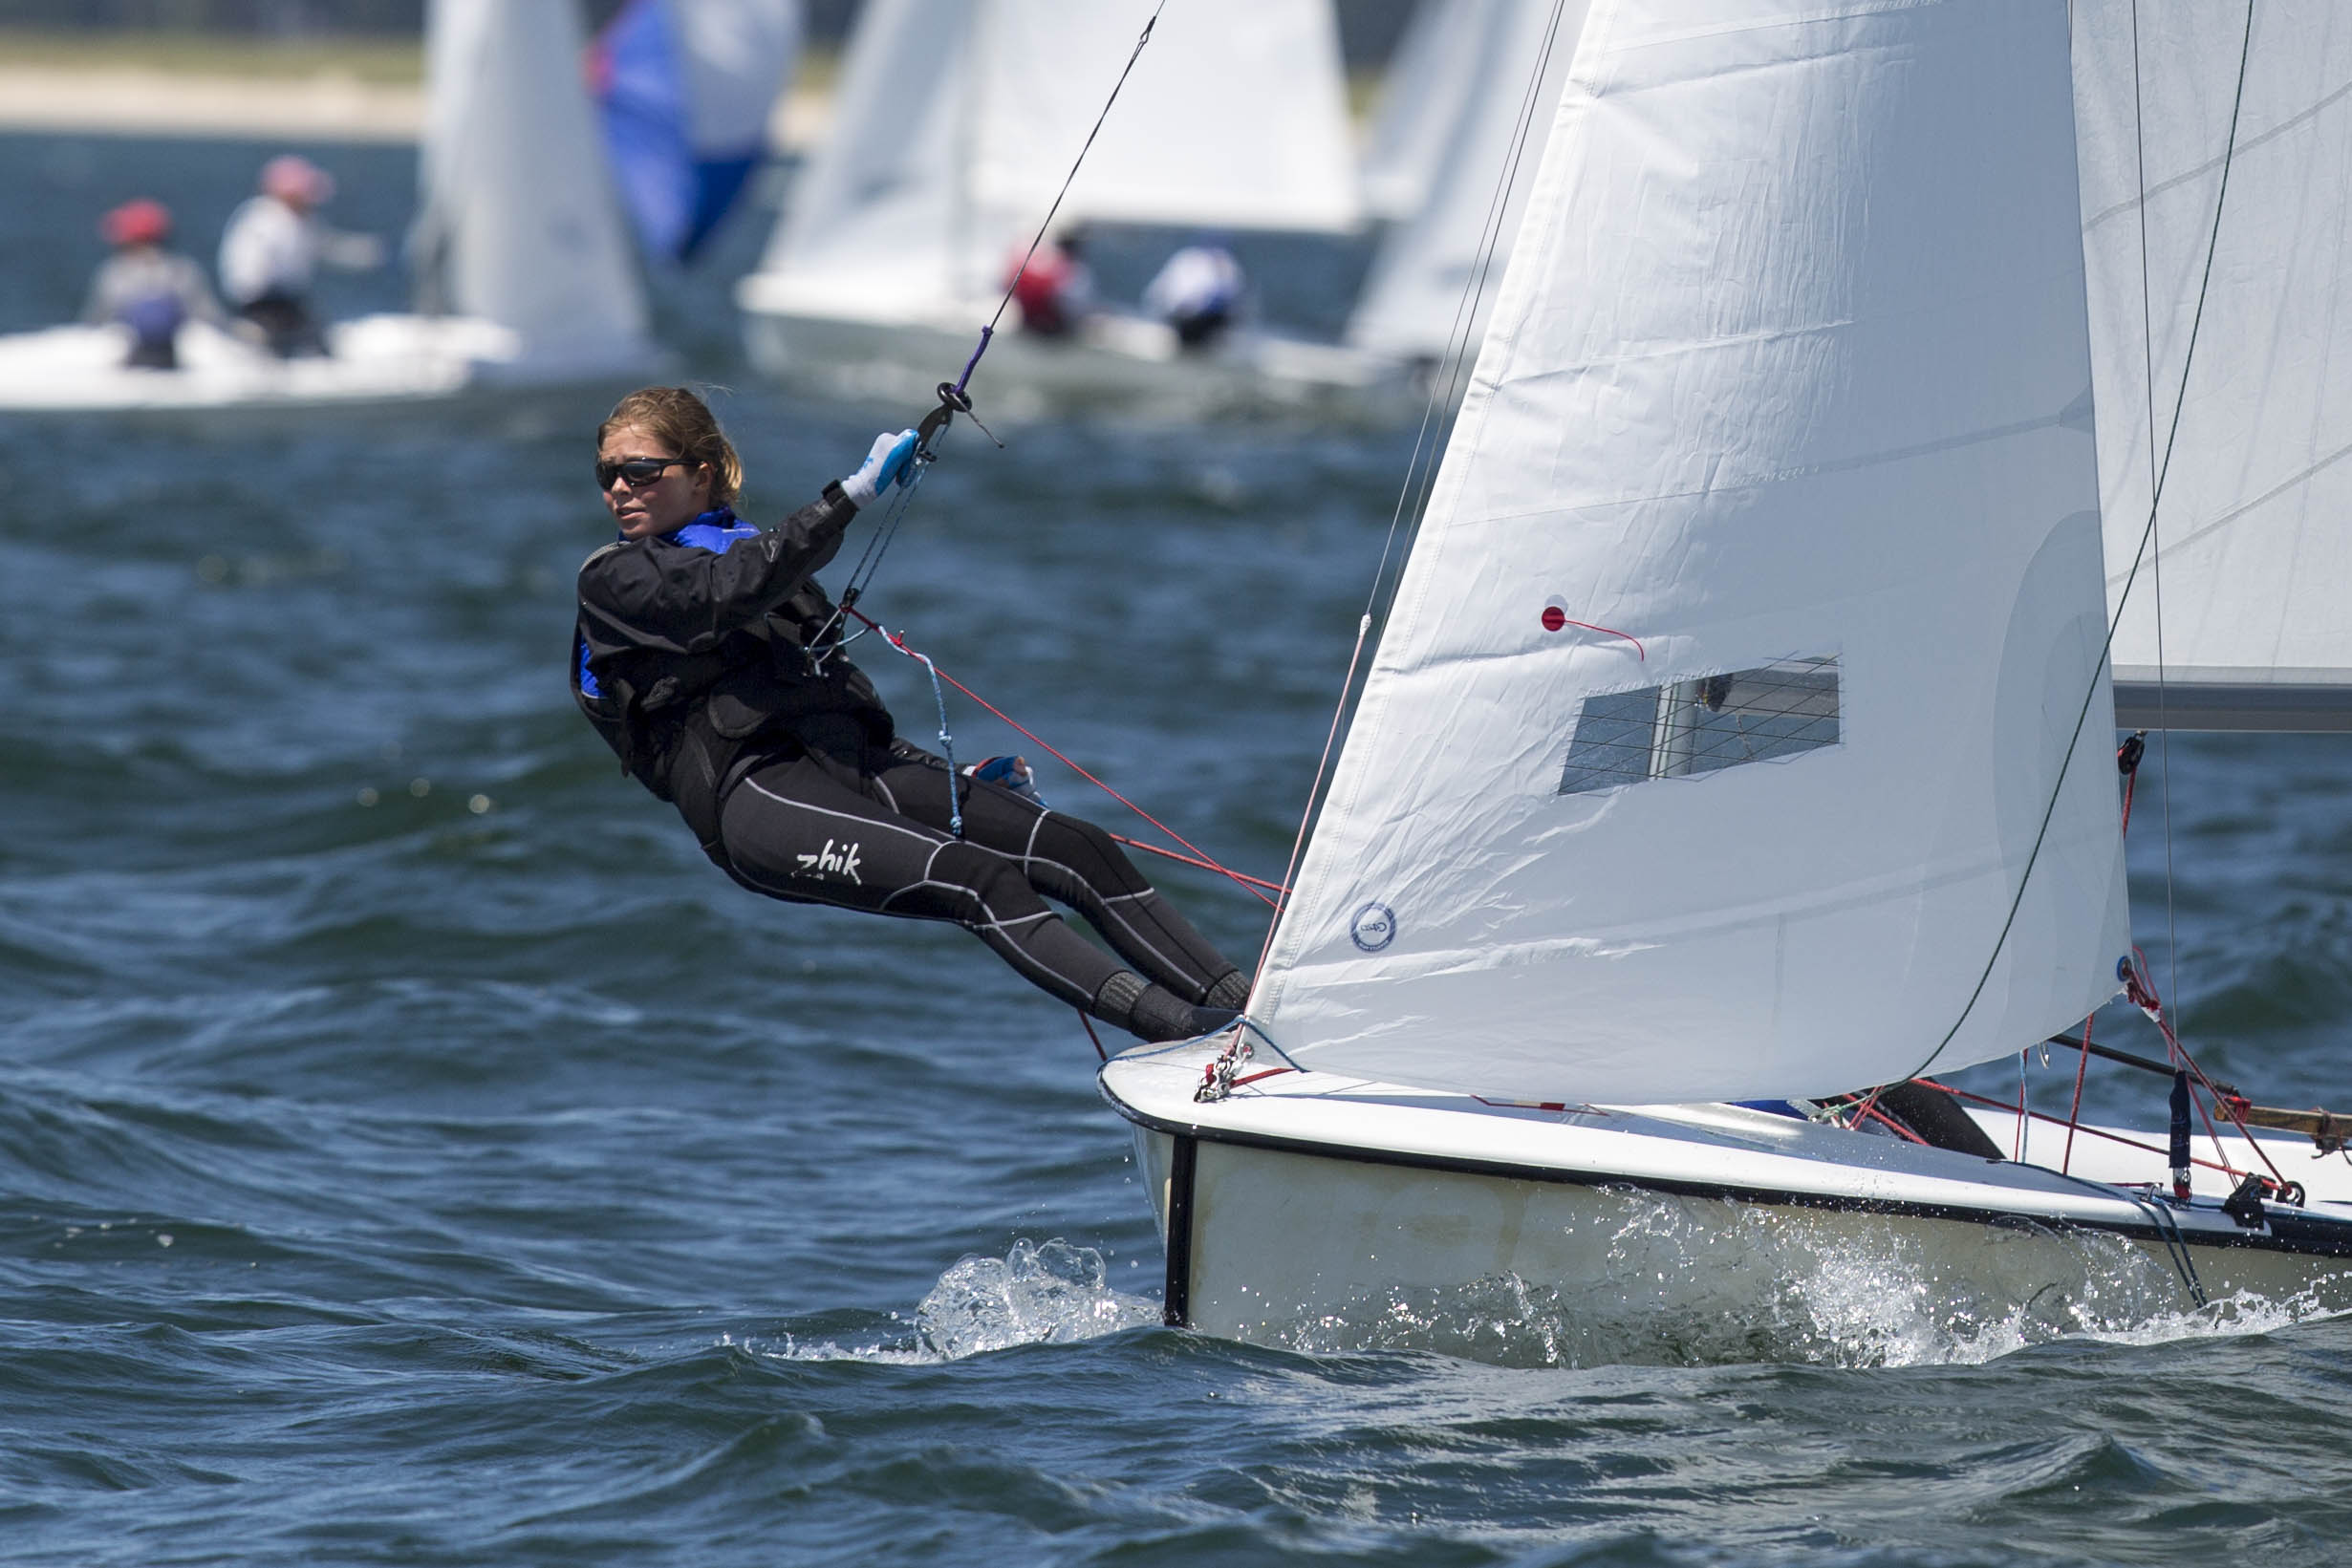  Theodora Horangic competes in the c420 sailing youth championships in Nantucket Sound out of Wianno on August 9, 2017. 